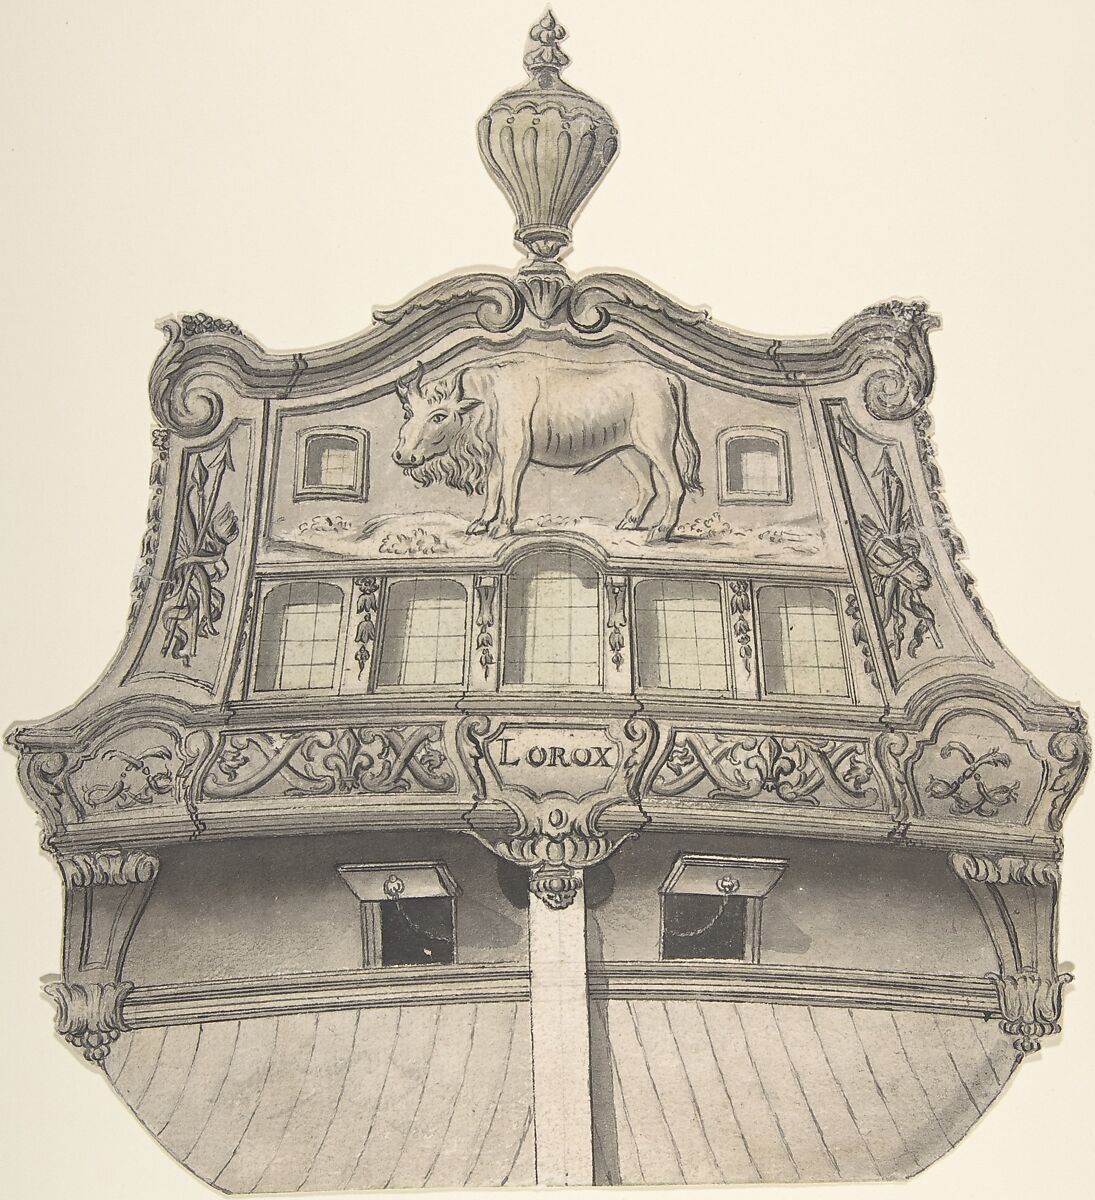 Design for Stern of the Boat "Lorox", Anonymous, French, 18th century, Pen and black and gray ink, brush and black and gray wash 